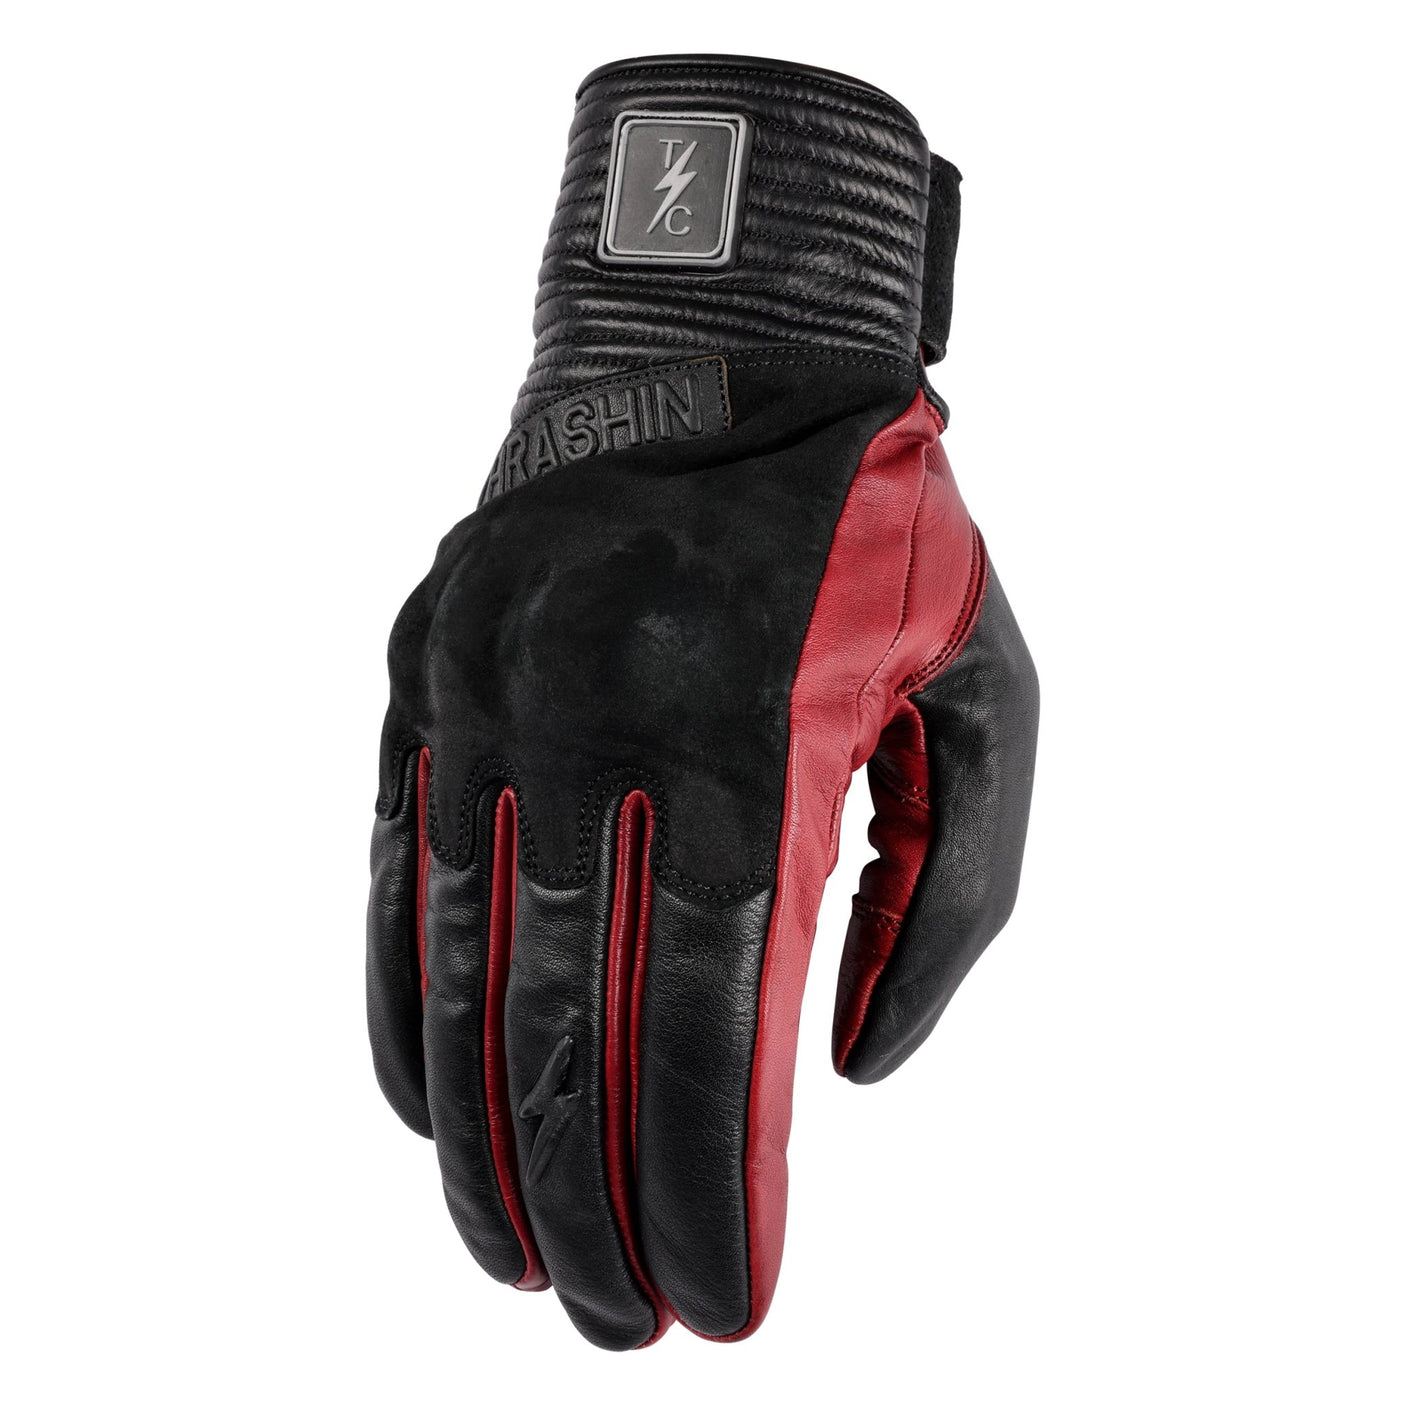 Boxer Glove - Red - Blood Eagle Speed Shop